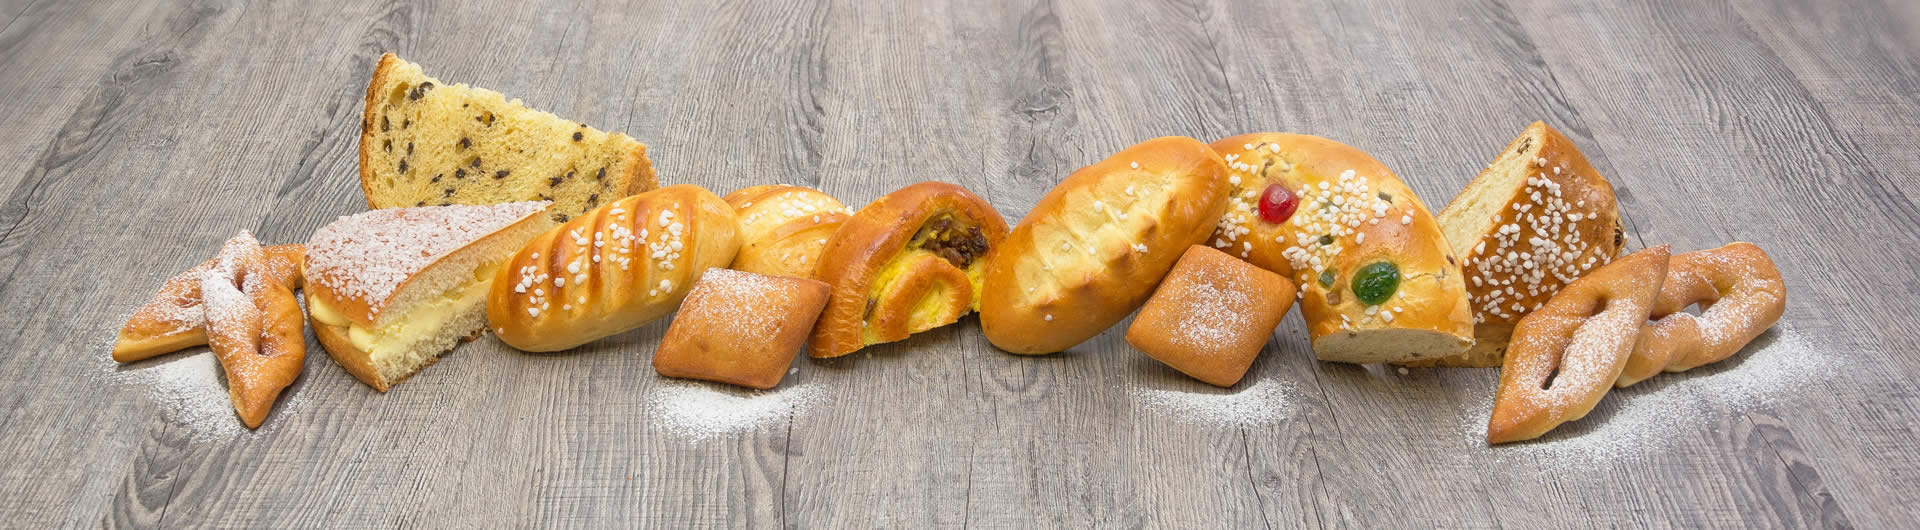 Brioches and Pastries